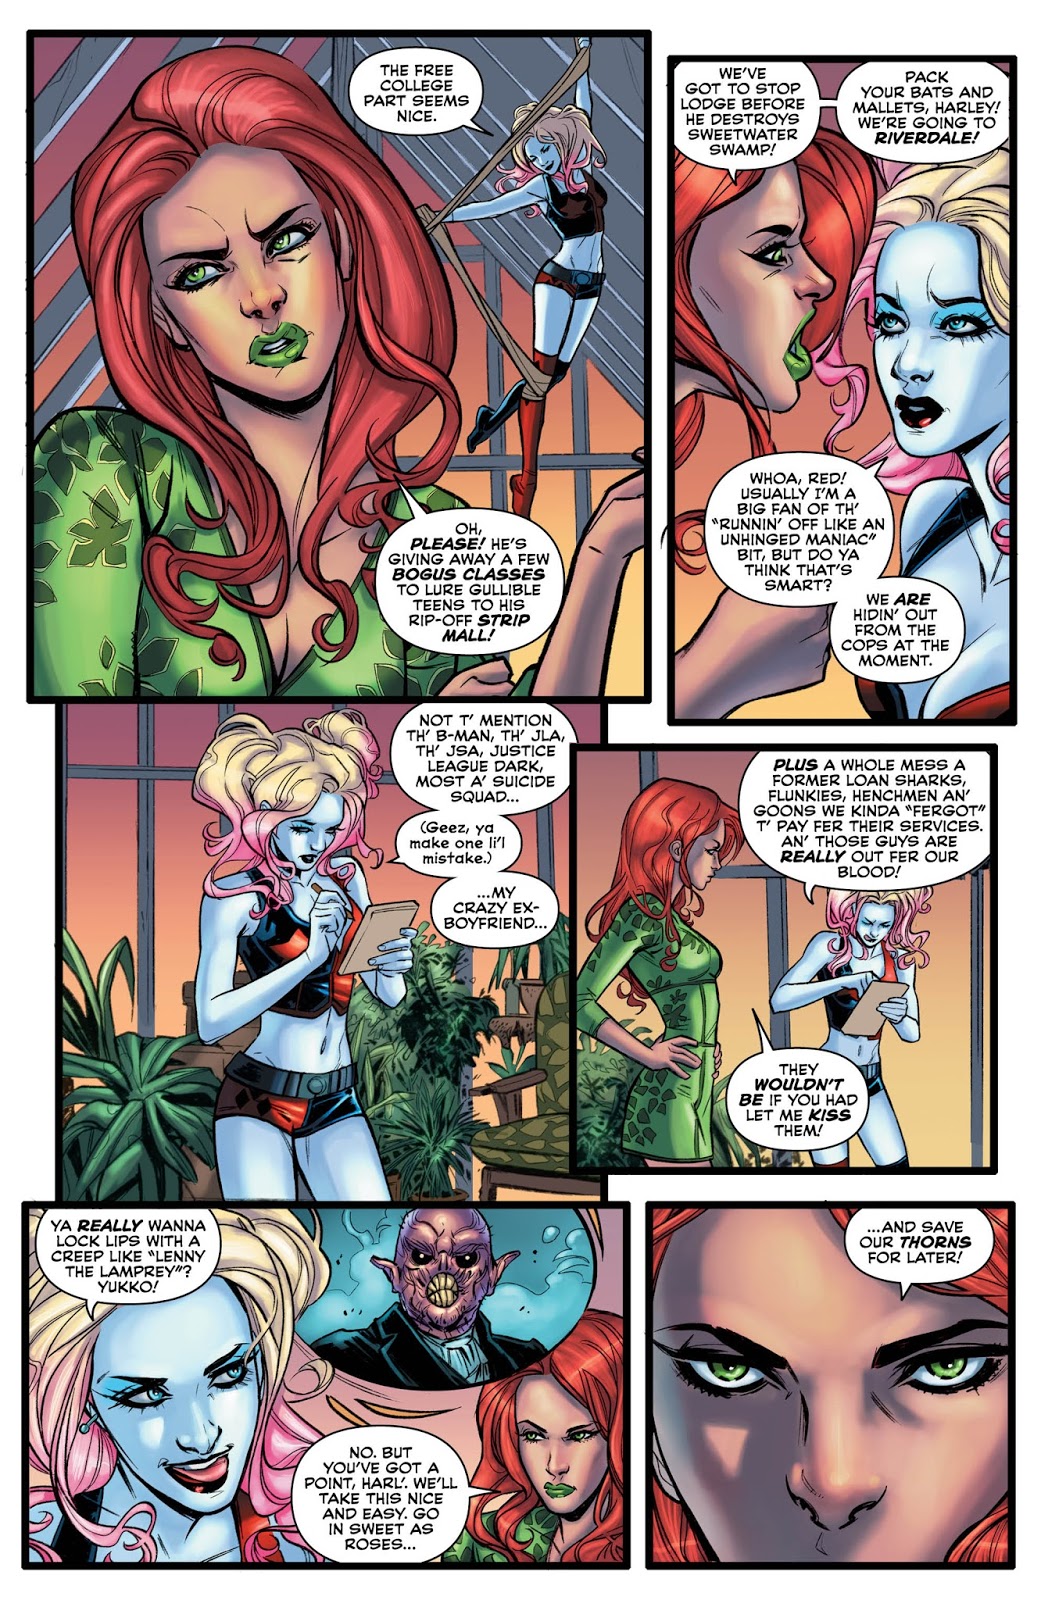 Weird Science DC Comics: Harley and Ivy Meet Betty and Veronica #1 Review  and **SPOILERS**